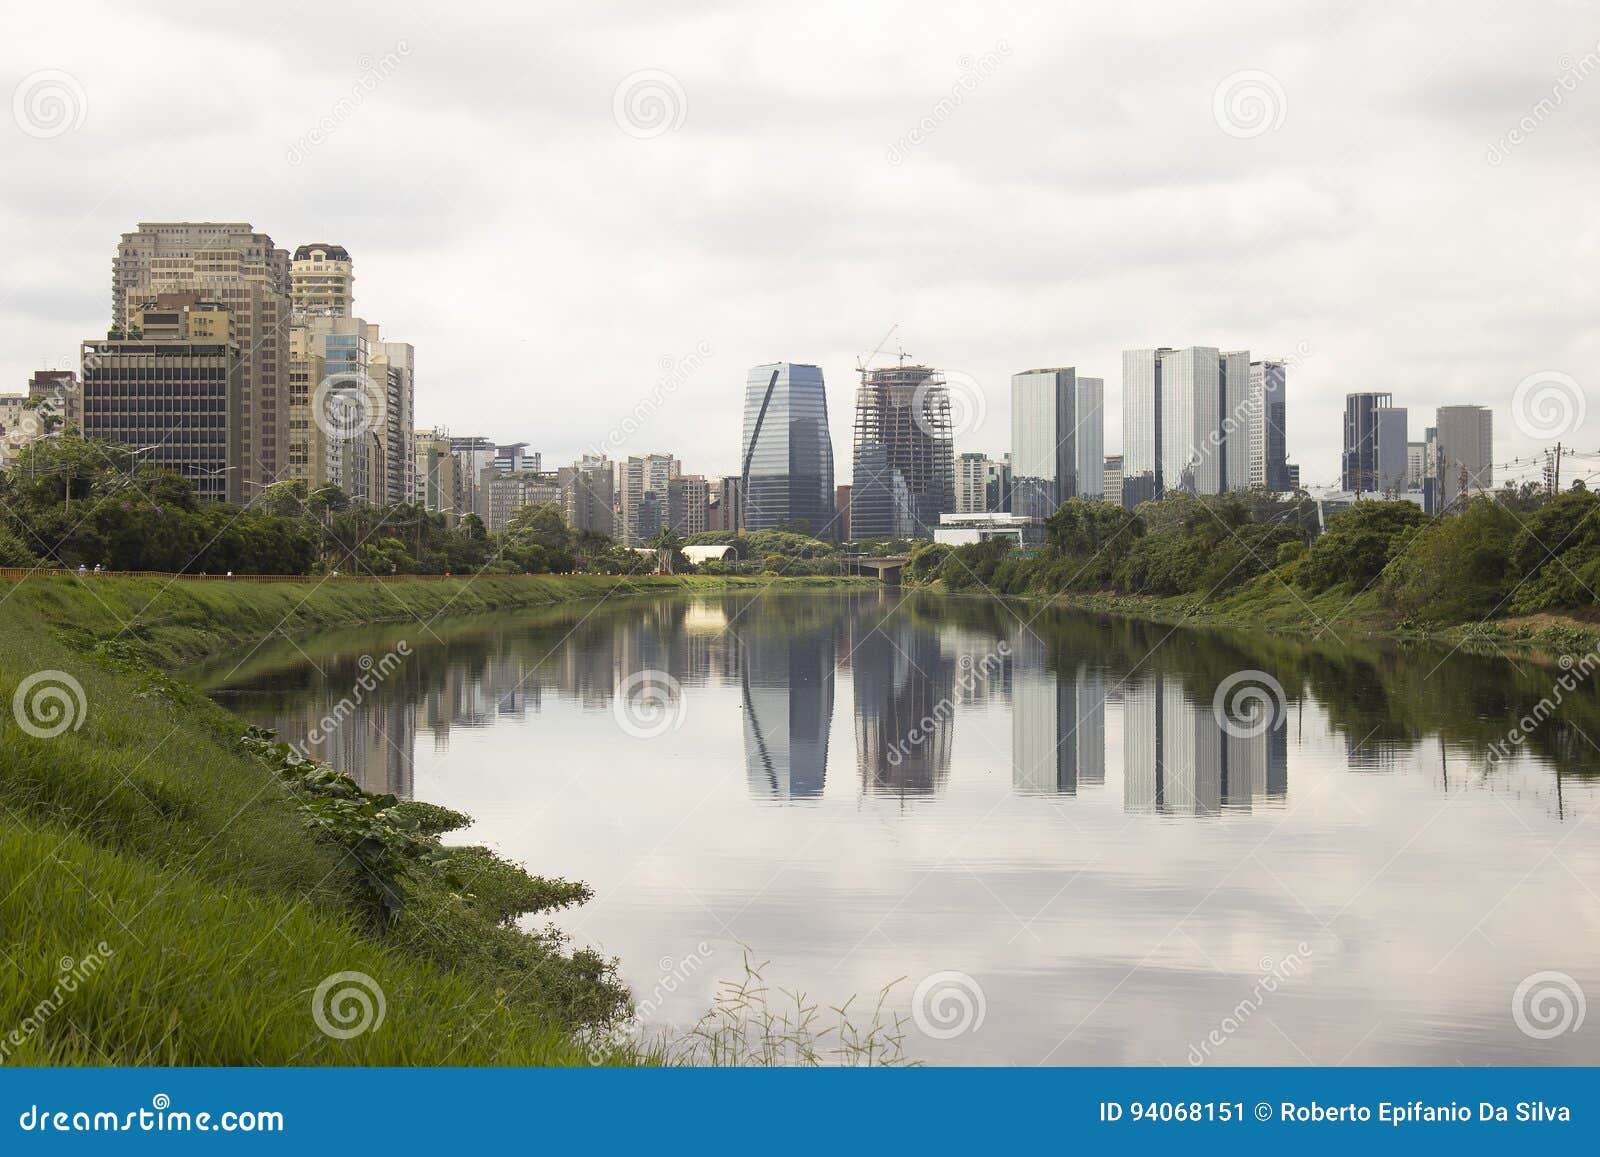 pinheiros river and skyscrapers in sao paulo, brazil